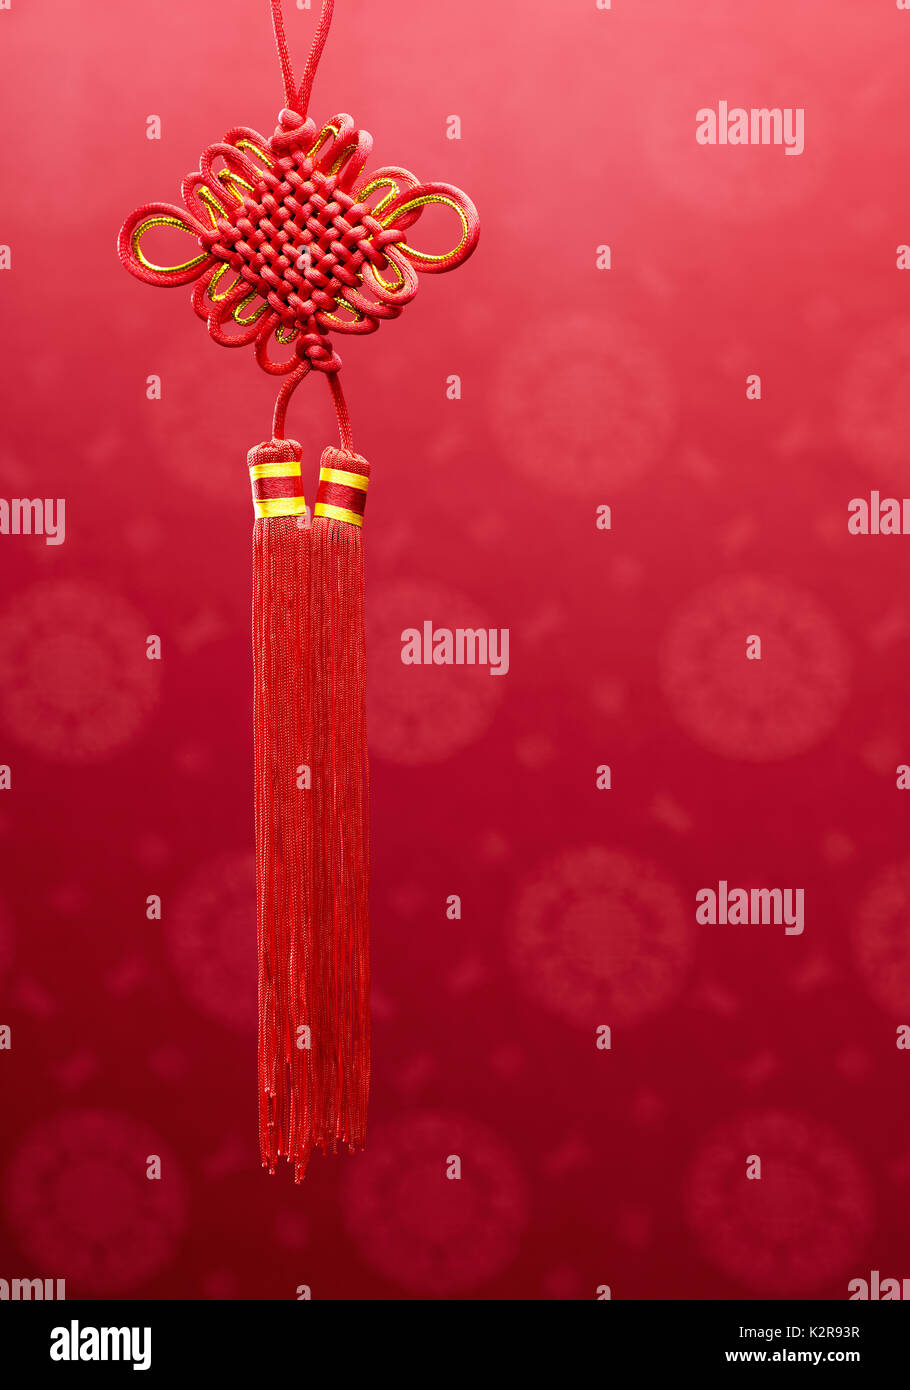 Chinese knot hanging decoration over red fabric with oriental motifs background Stock Photo